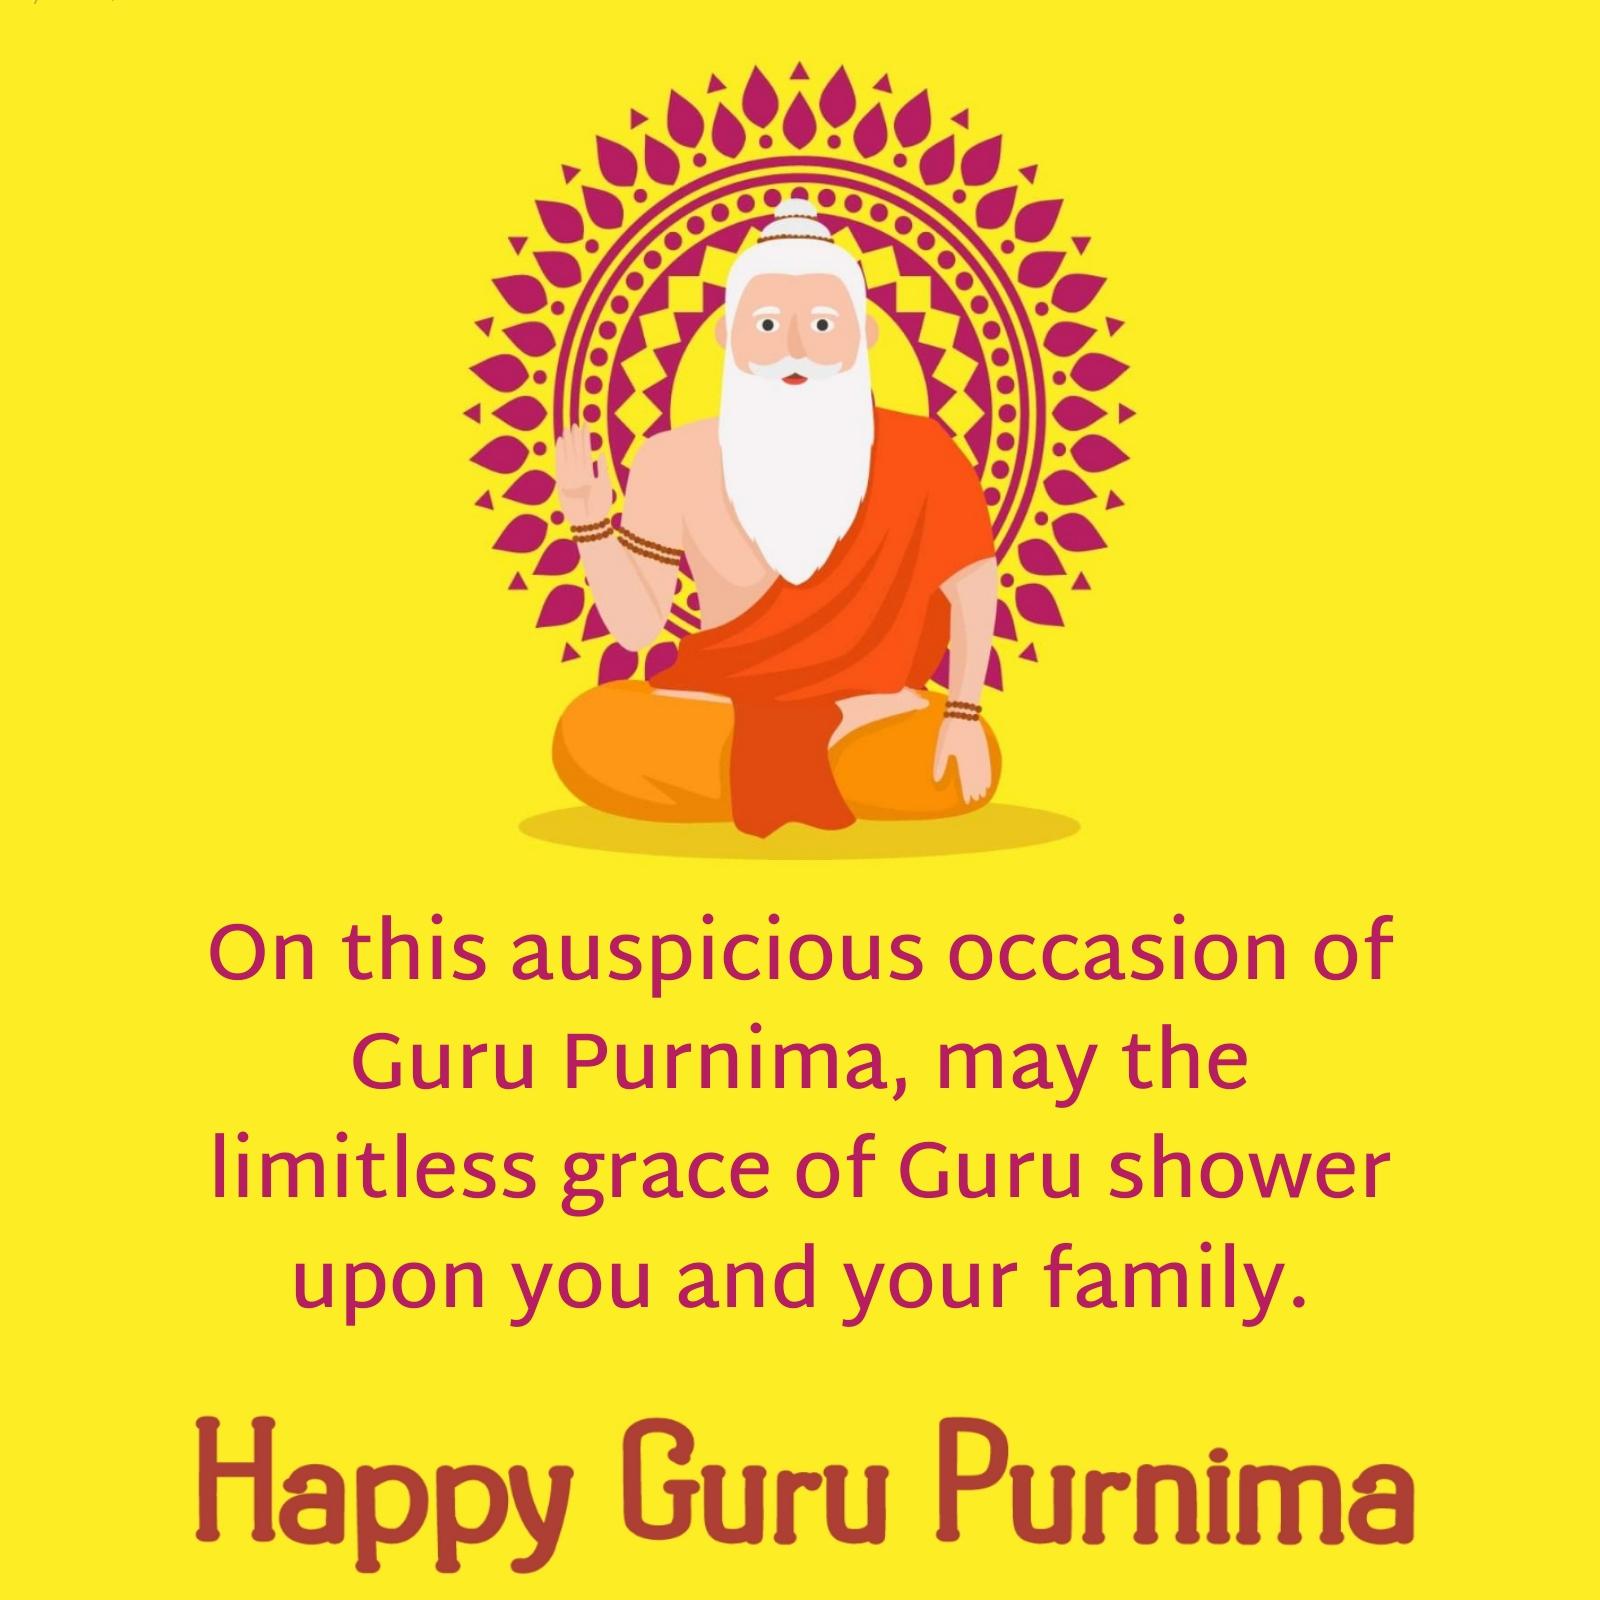 On this auspicious occasion of Guru Purnima may the limitless grace